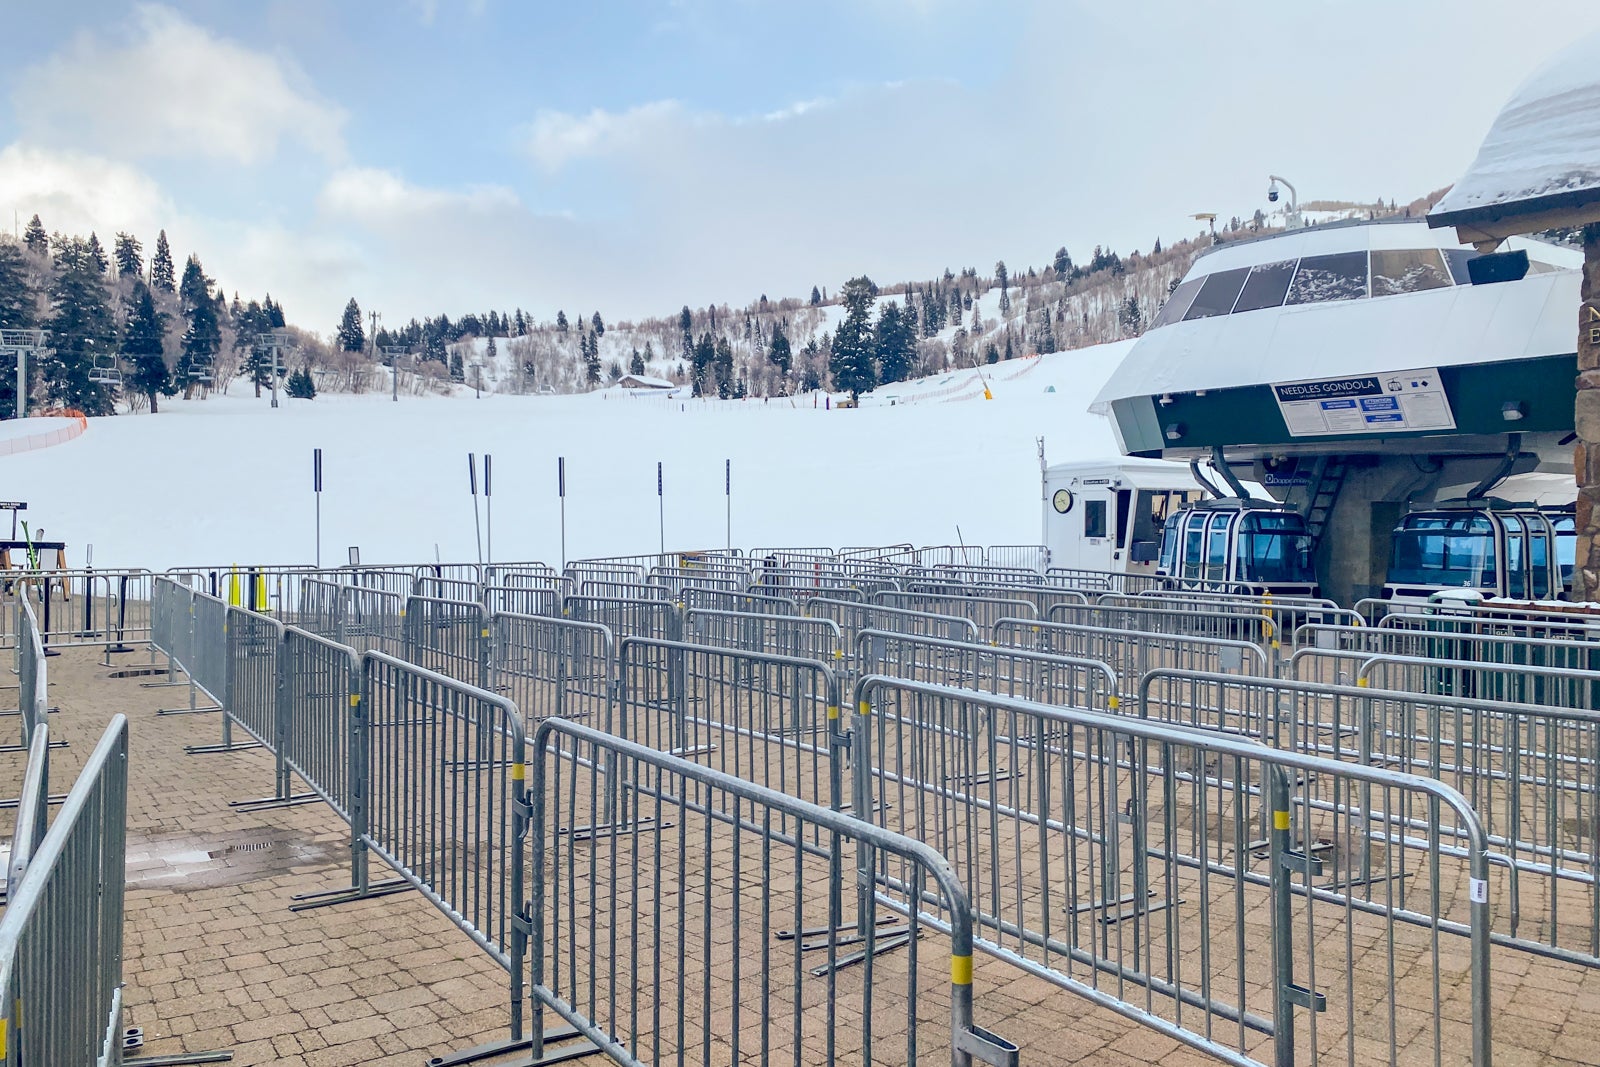 Club Med plans for all-inclusive ski resort in Utah are off, for now – The Points Guy